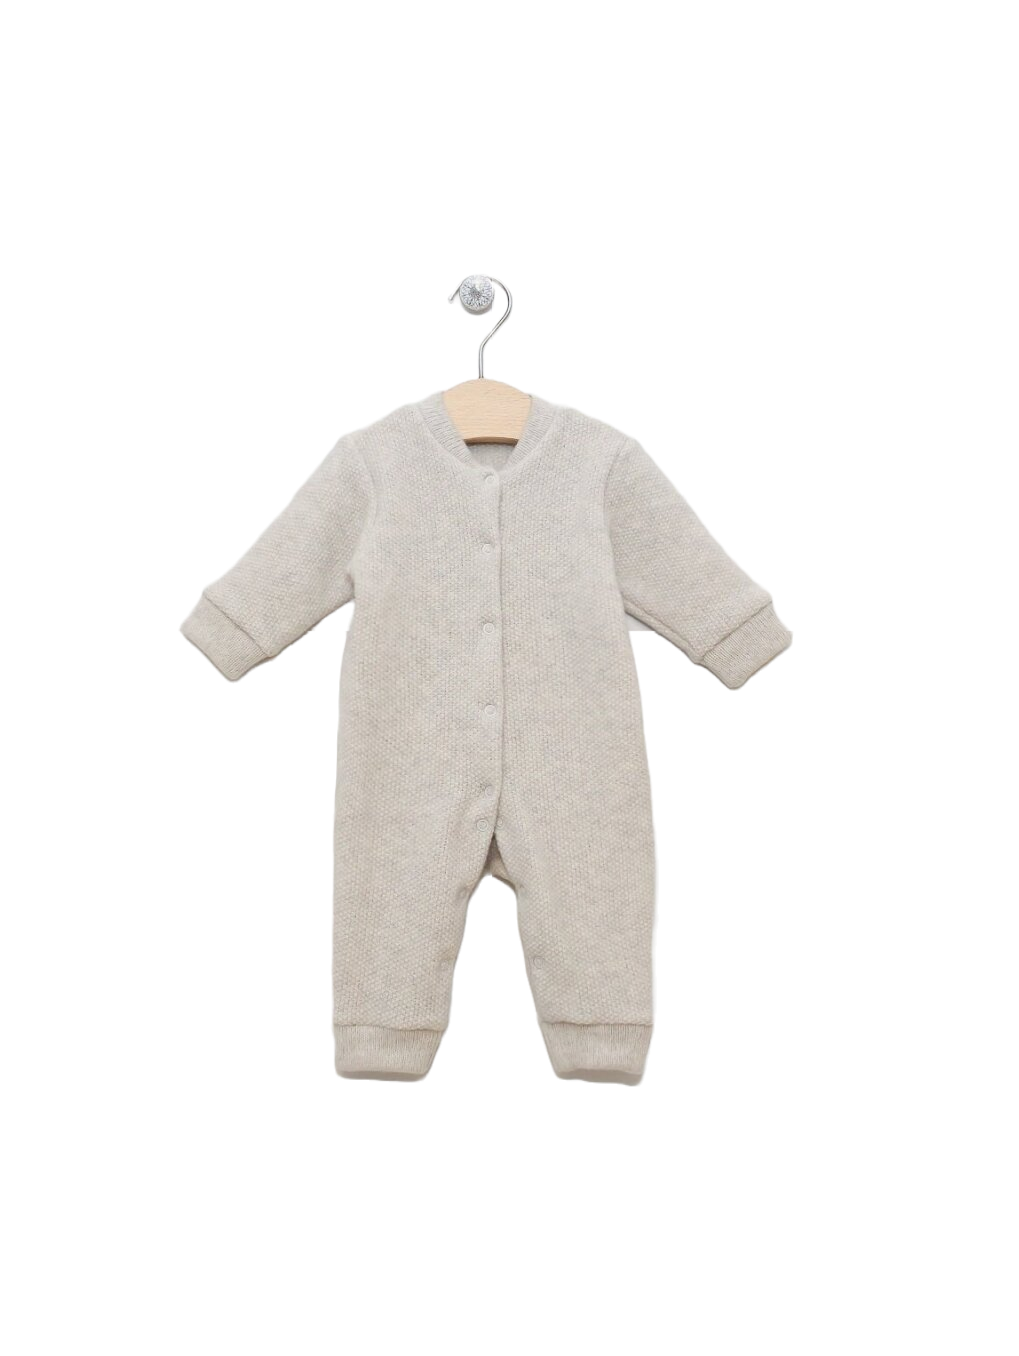 Merino wool Baby clothes set for hospital